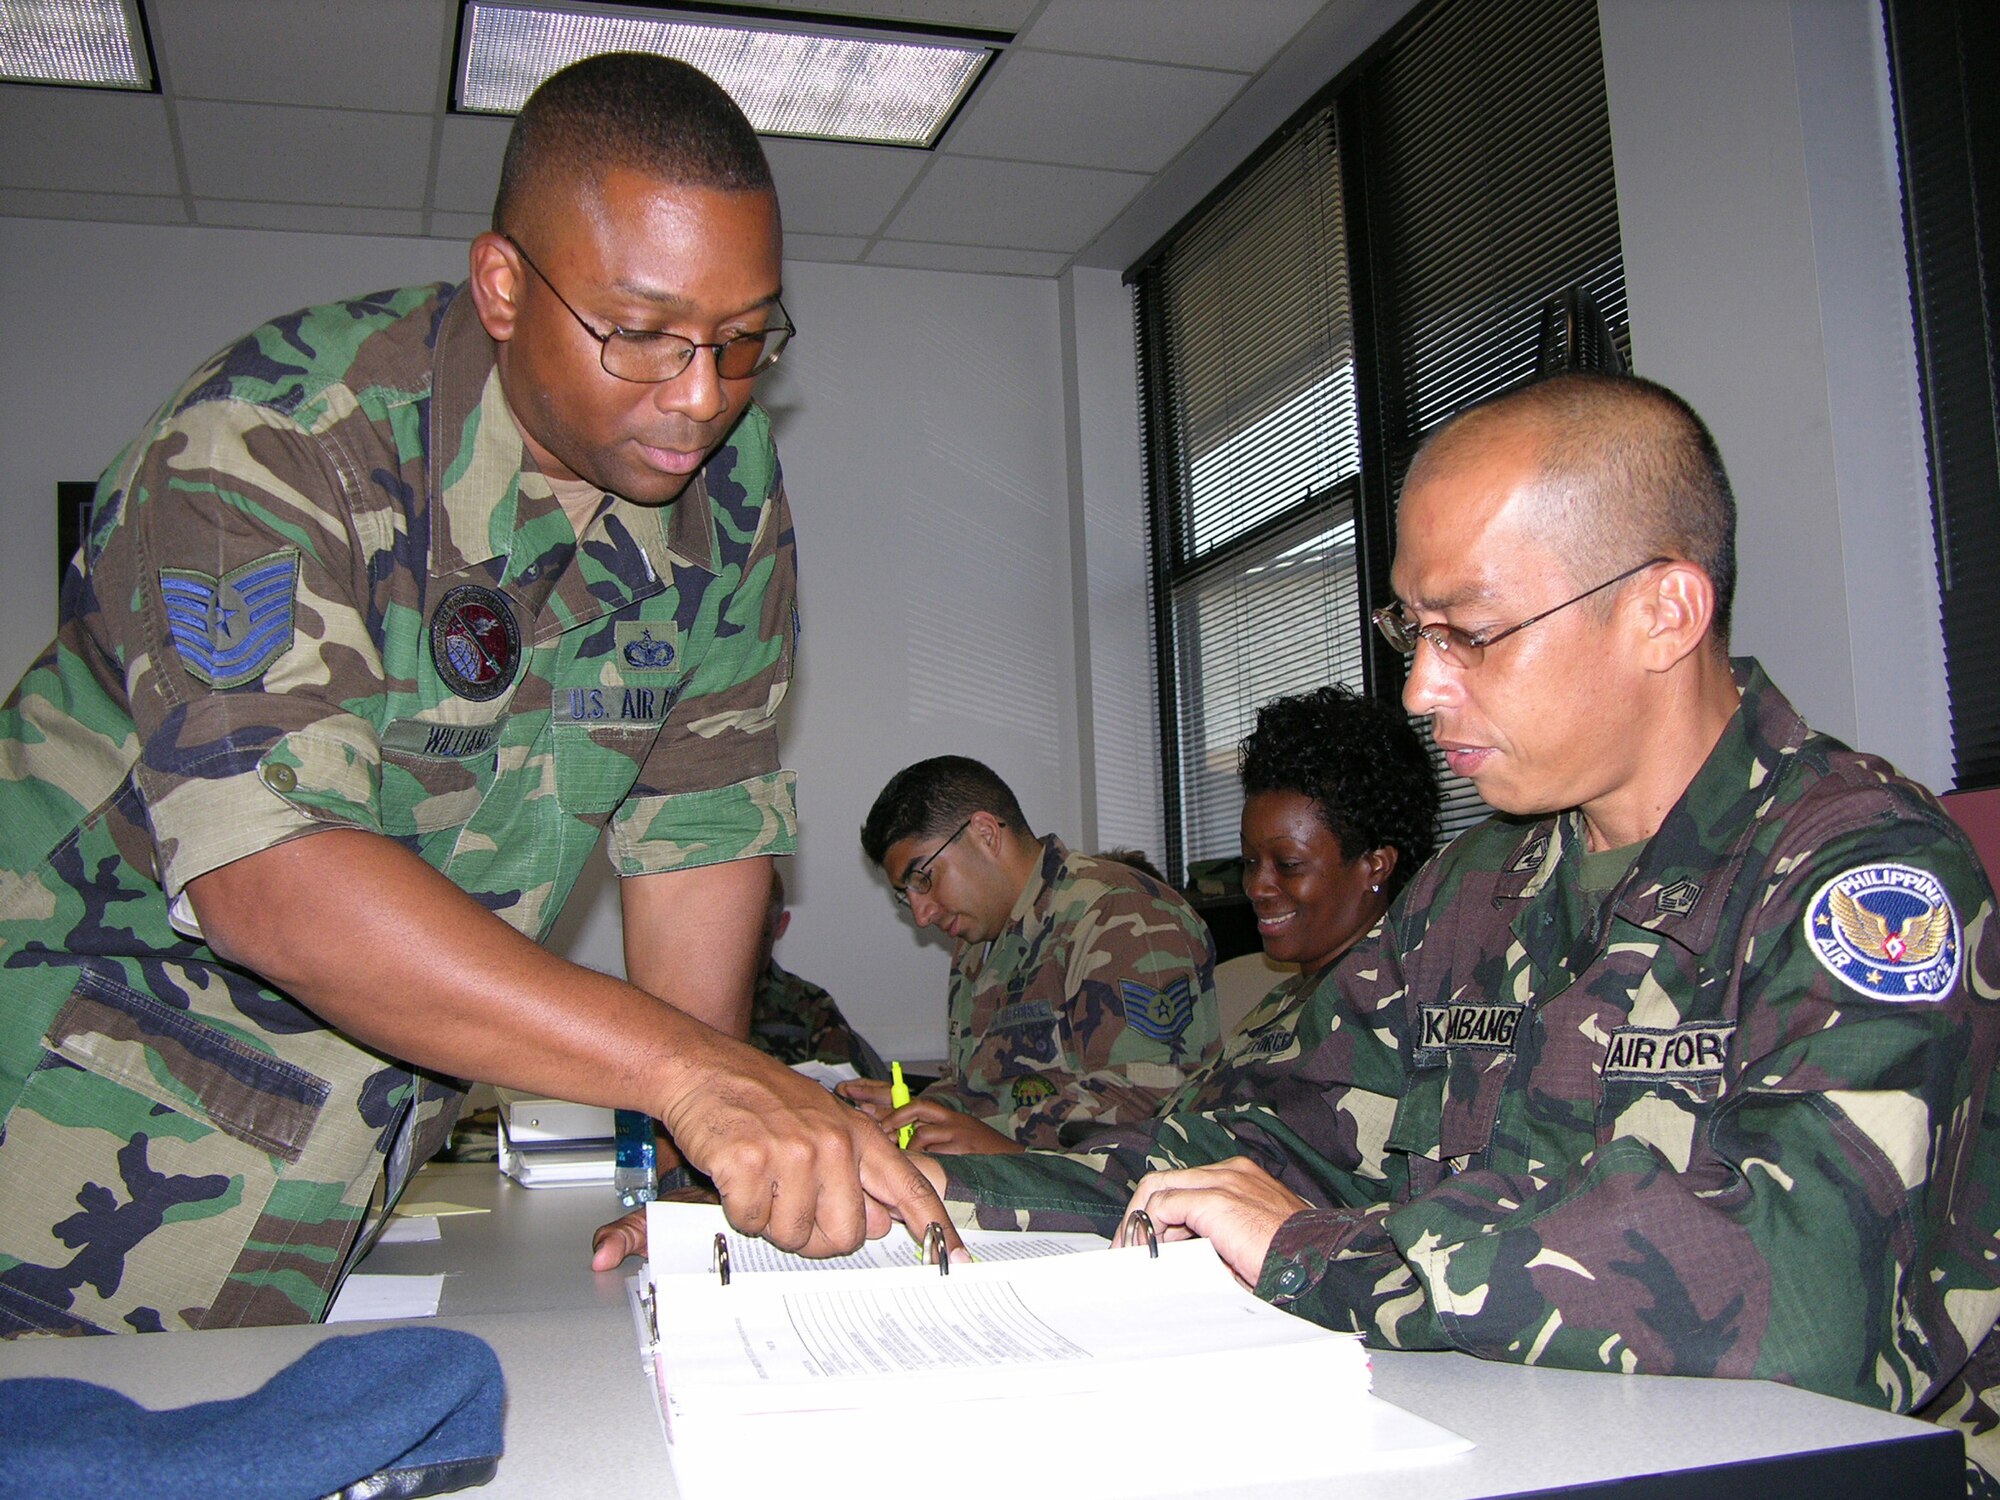 MAXWELL AIR FORCE BASE, Ala. (AETCNS) -- Tech. Sgt. Curtis Williams, Gunter NCO Academy instructor, points out information to the academy’s first international student, Tech Sgt. Virgilio Macasaet Katimbang of the Philippine air force. Sergeant Katimbang will graduate the academy Sept. 15 and return to an instructor job at the Philippine air force NCO School. (U.S. Air Force photo by Photo by Carl Bergquist)